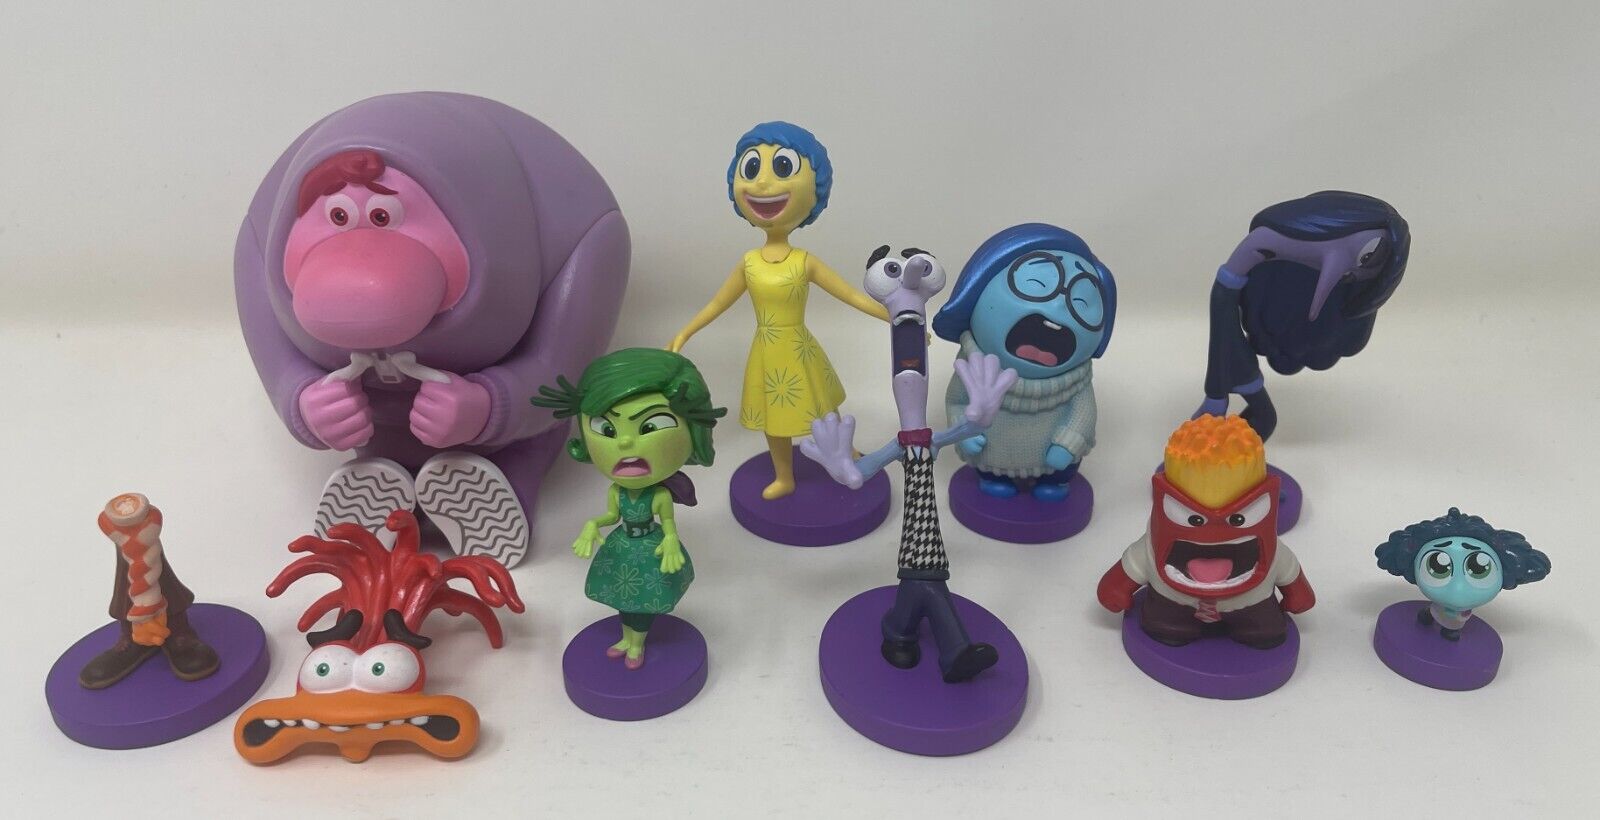 Disney Parks Pixar Inside Out 2 Deluxe 9 Figure Set Embarrassment Anxiety RARE